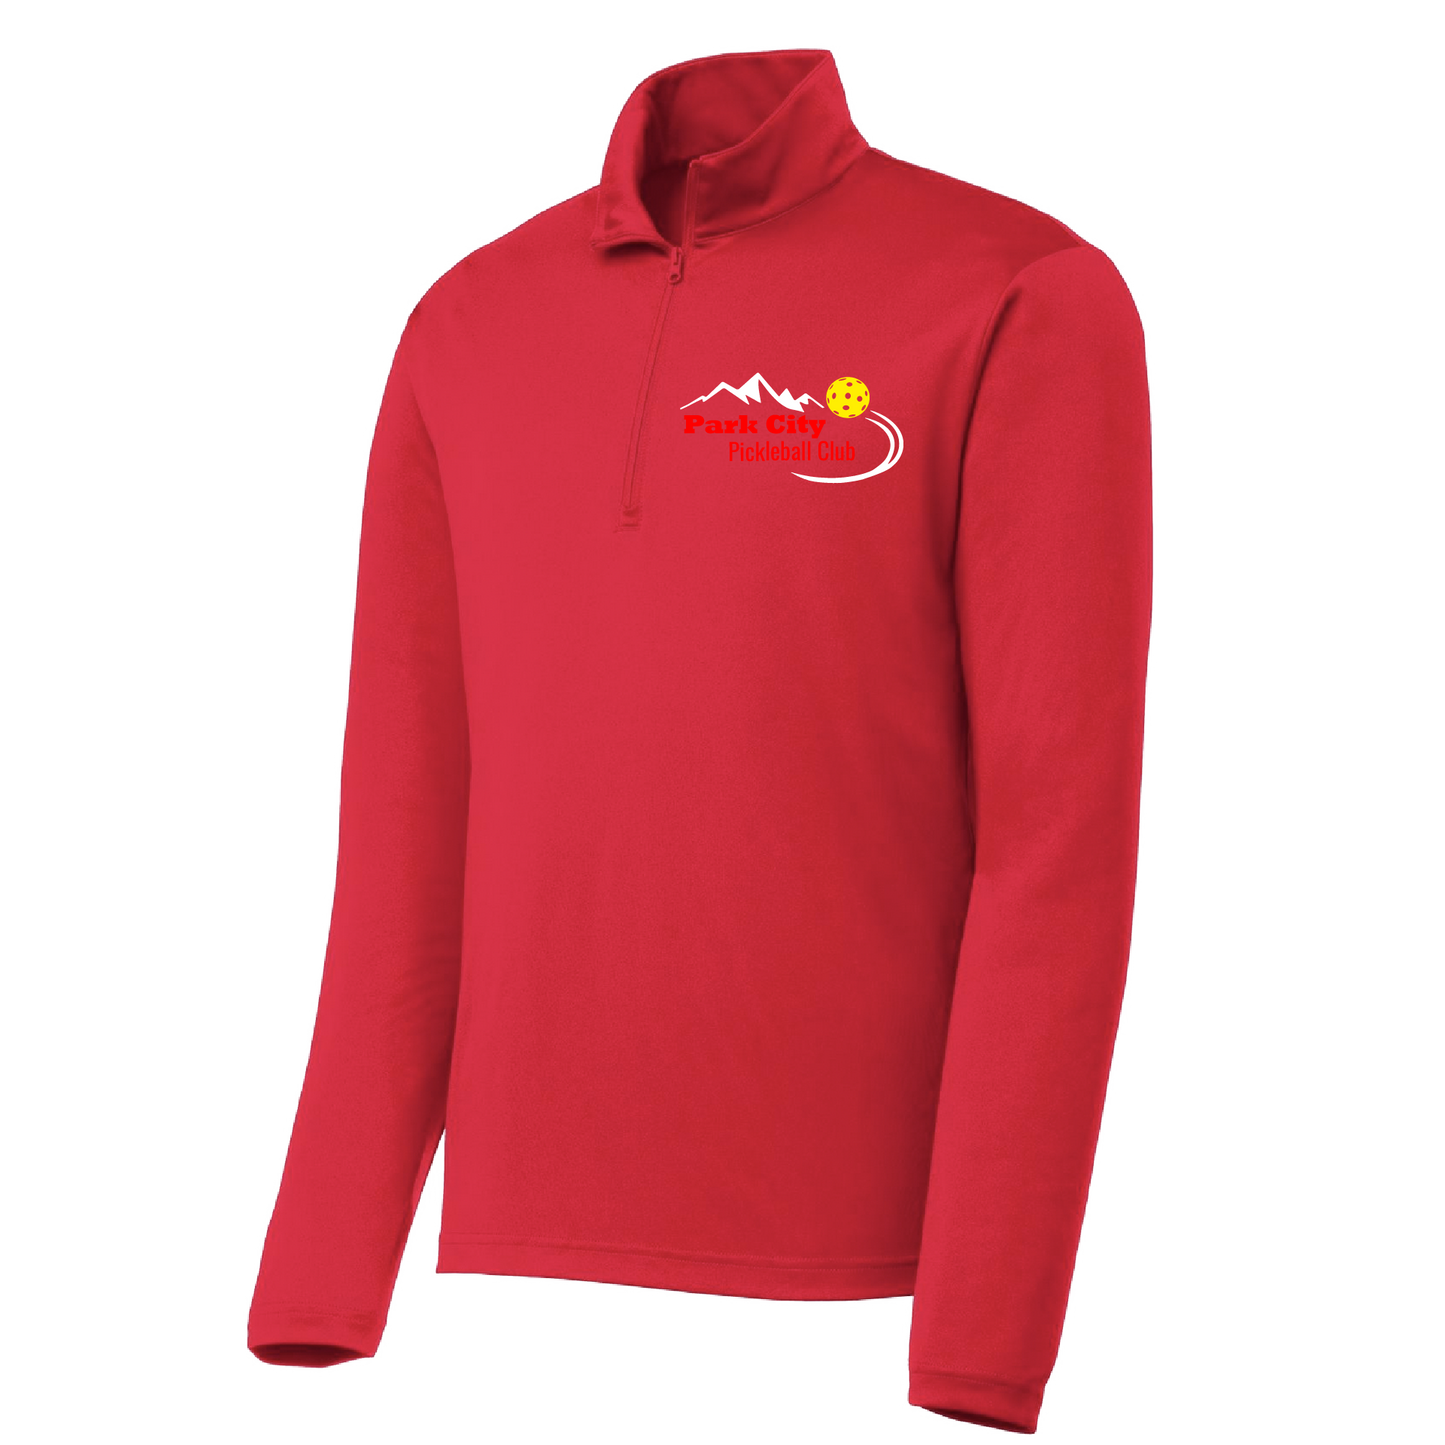 Pickleball Design: Park City Pickleball Club (red words)  Men's 1/4-Zip Pullover  Turn up the volume in this Men's shirt with its perfect mix of softness and attitude. Material is ultra-comfortable with moisture wicking properties and tri-blend softness. PosiCharge technology locks in color. Highly breathable and lightweight. Versatile enough for wearing year-round. 